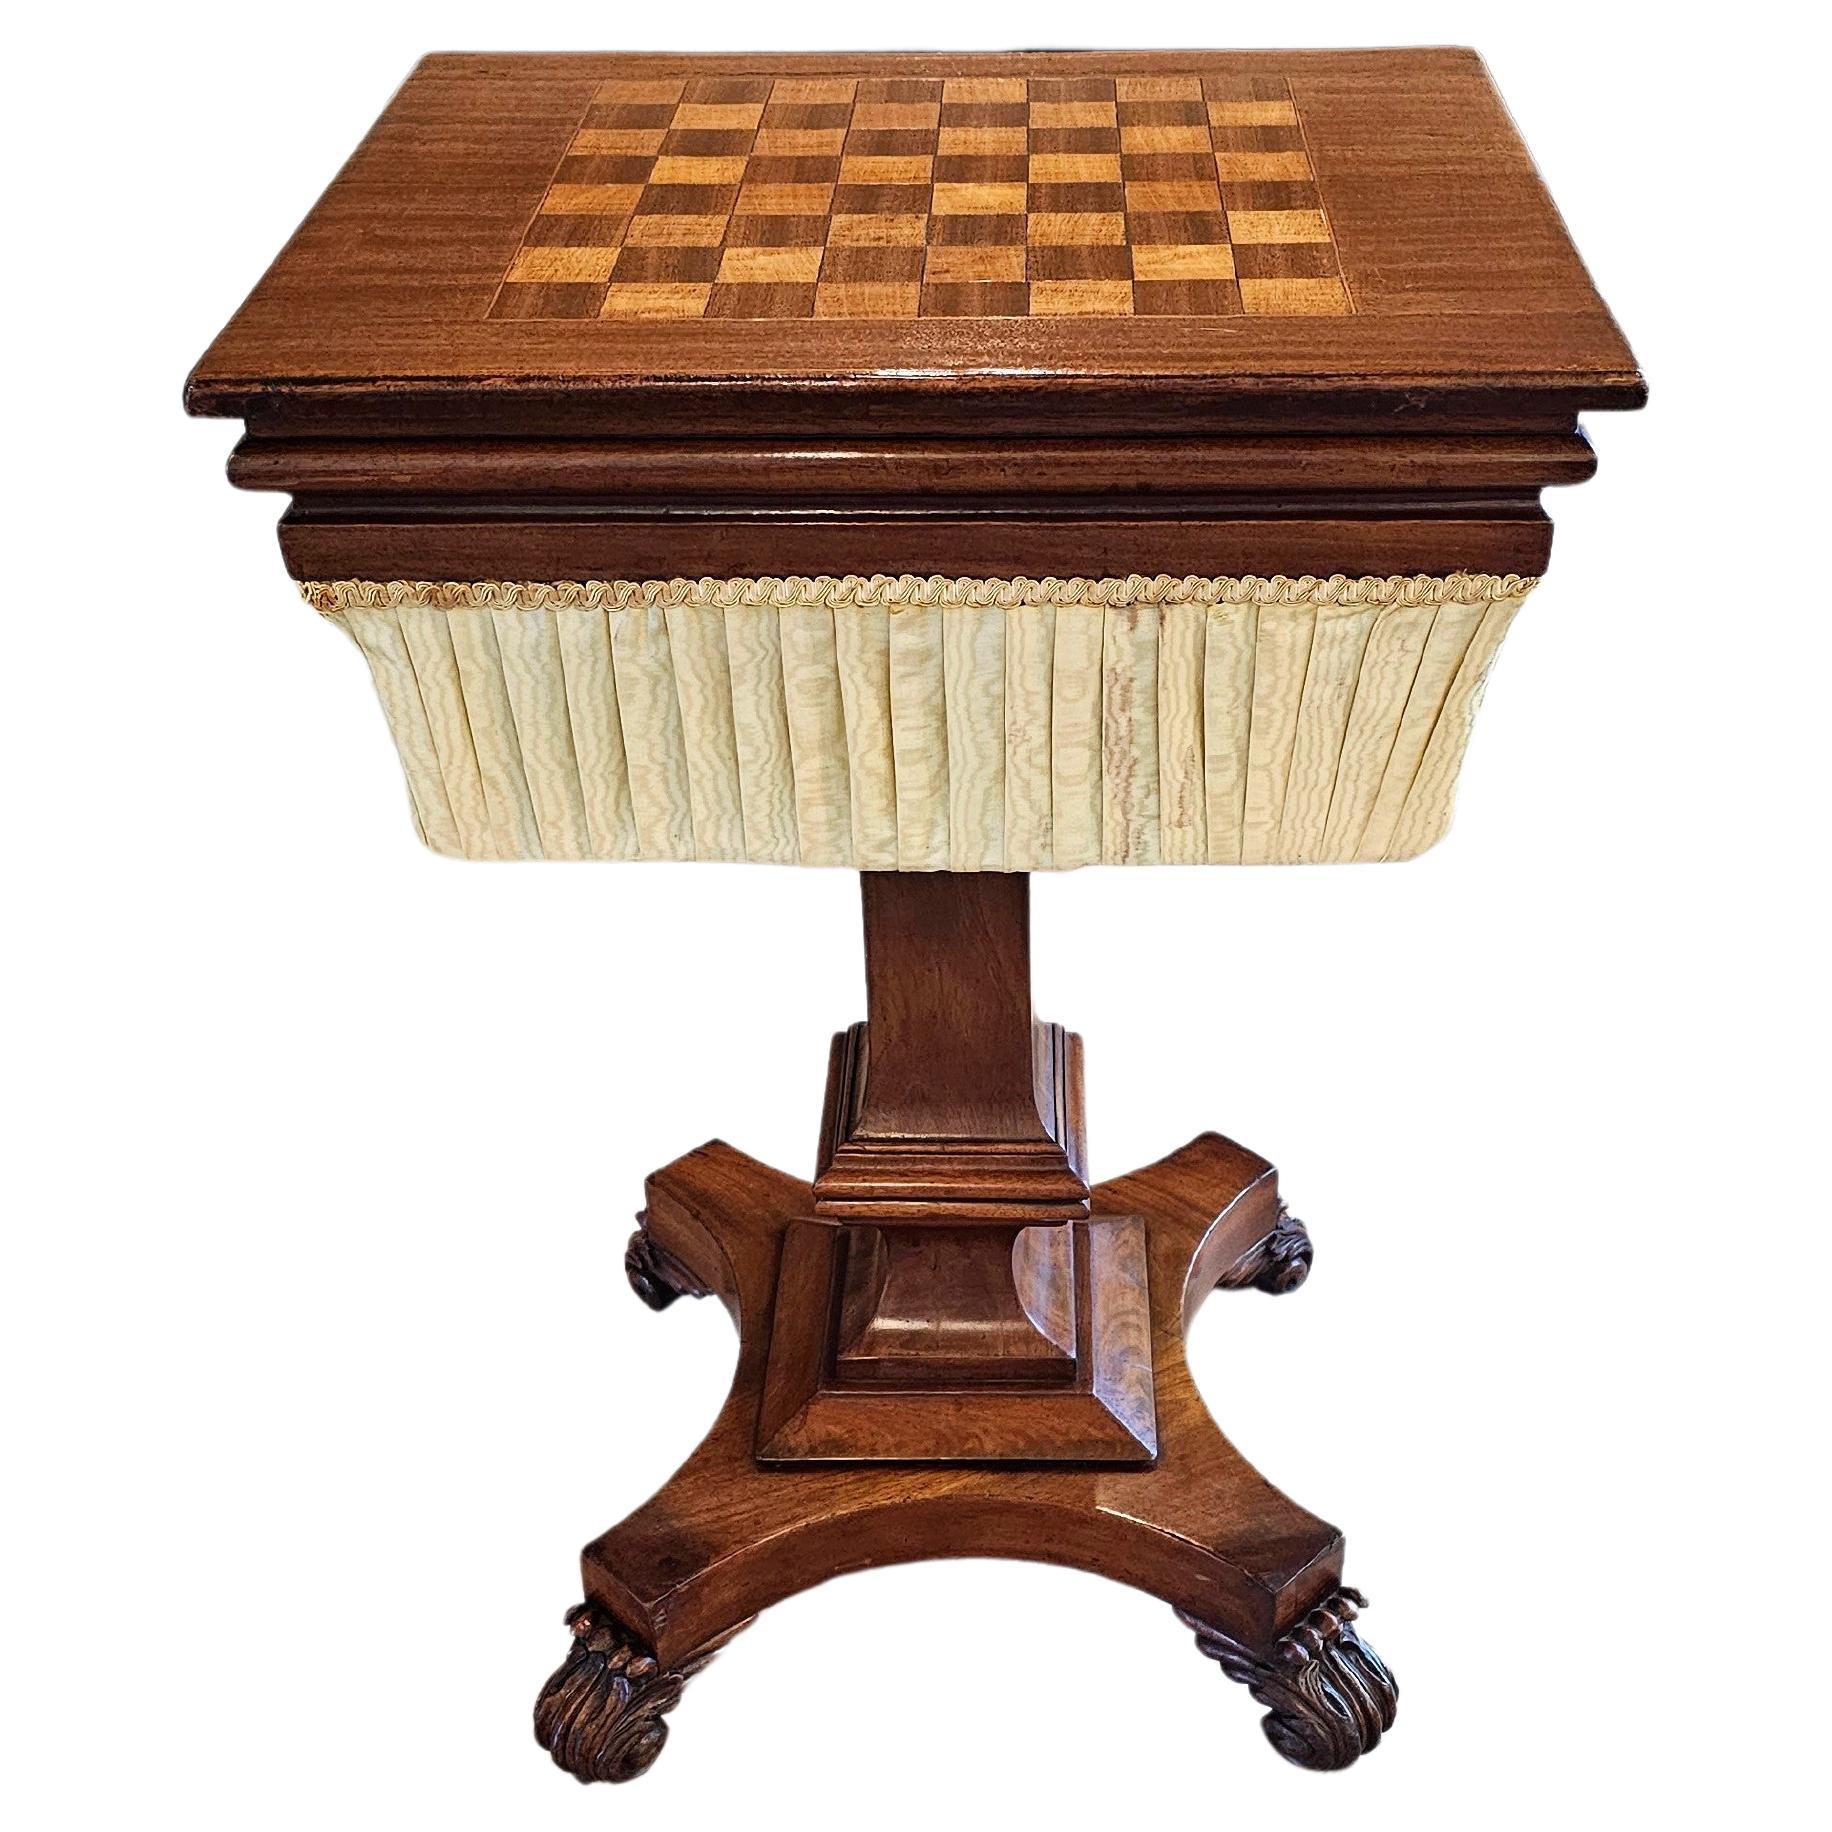 19th Century English William IV Period Mahogany Games Table Sewing Stand  For Sale